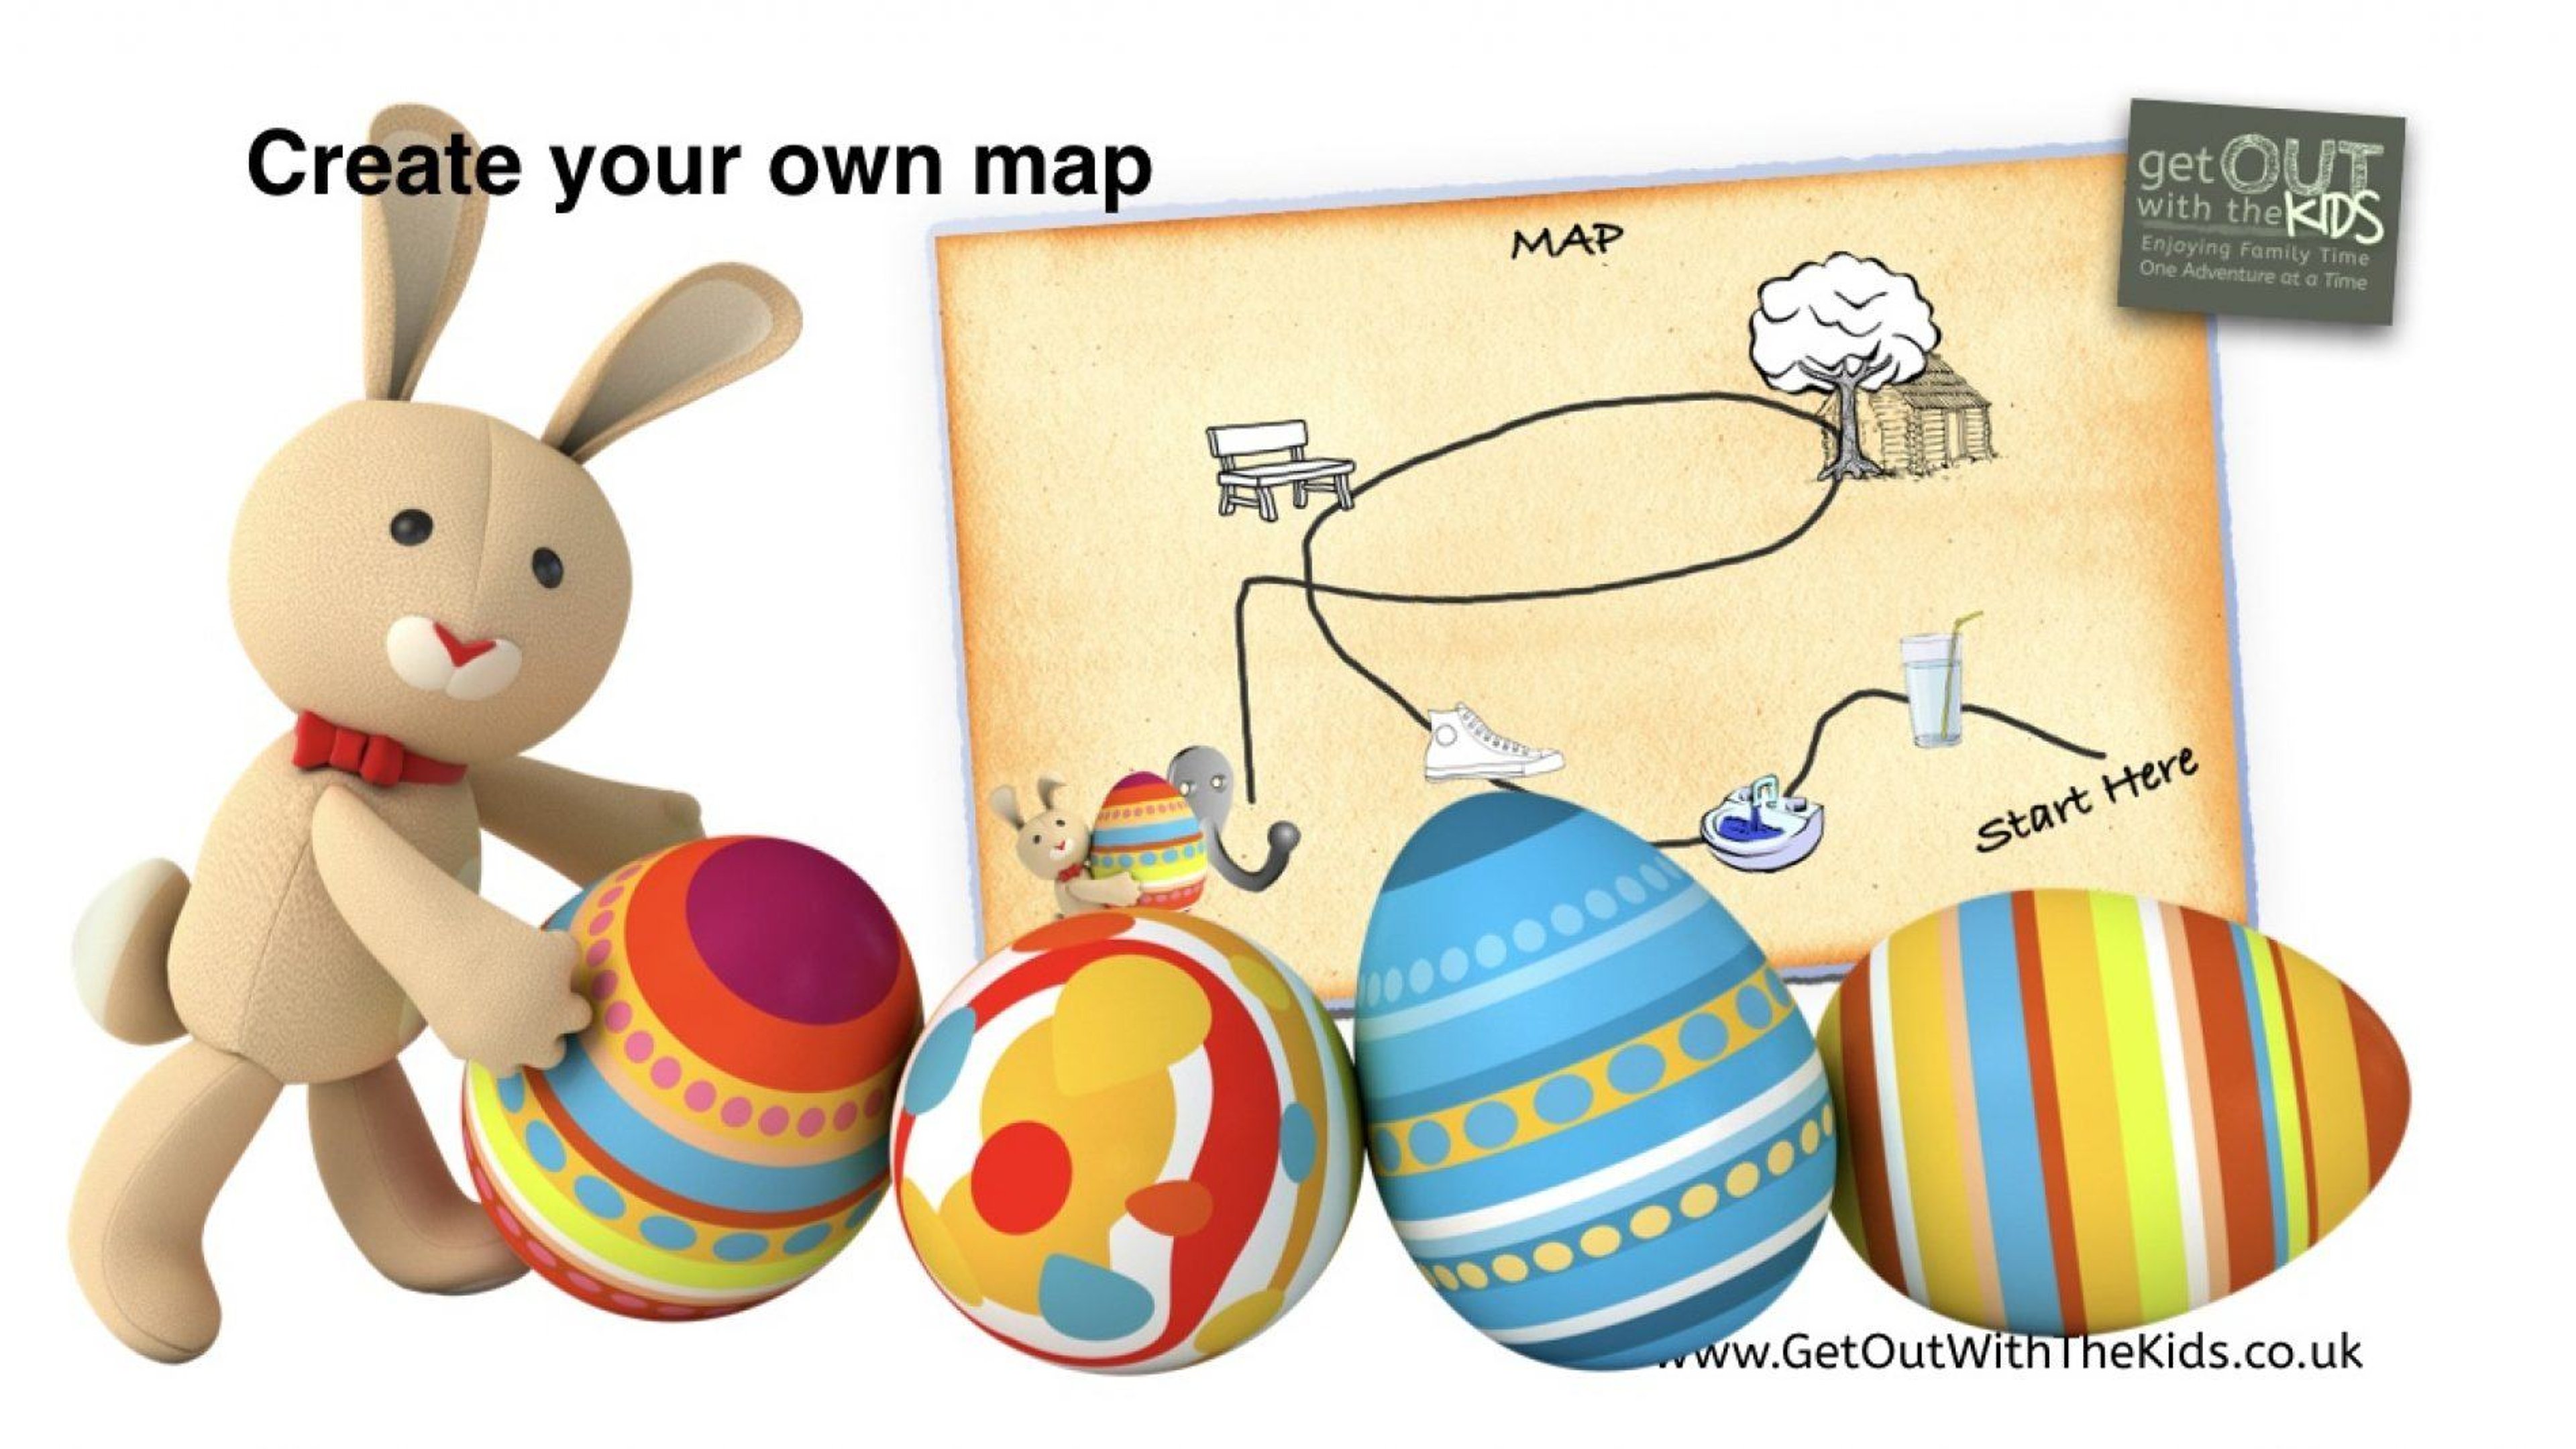 Download and print this map background, then draw a map for an Easter-themed treasure hunt.